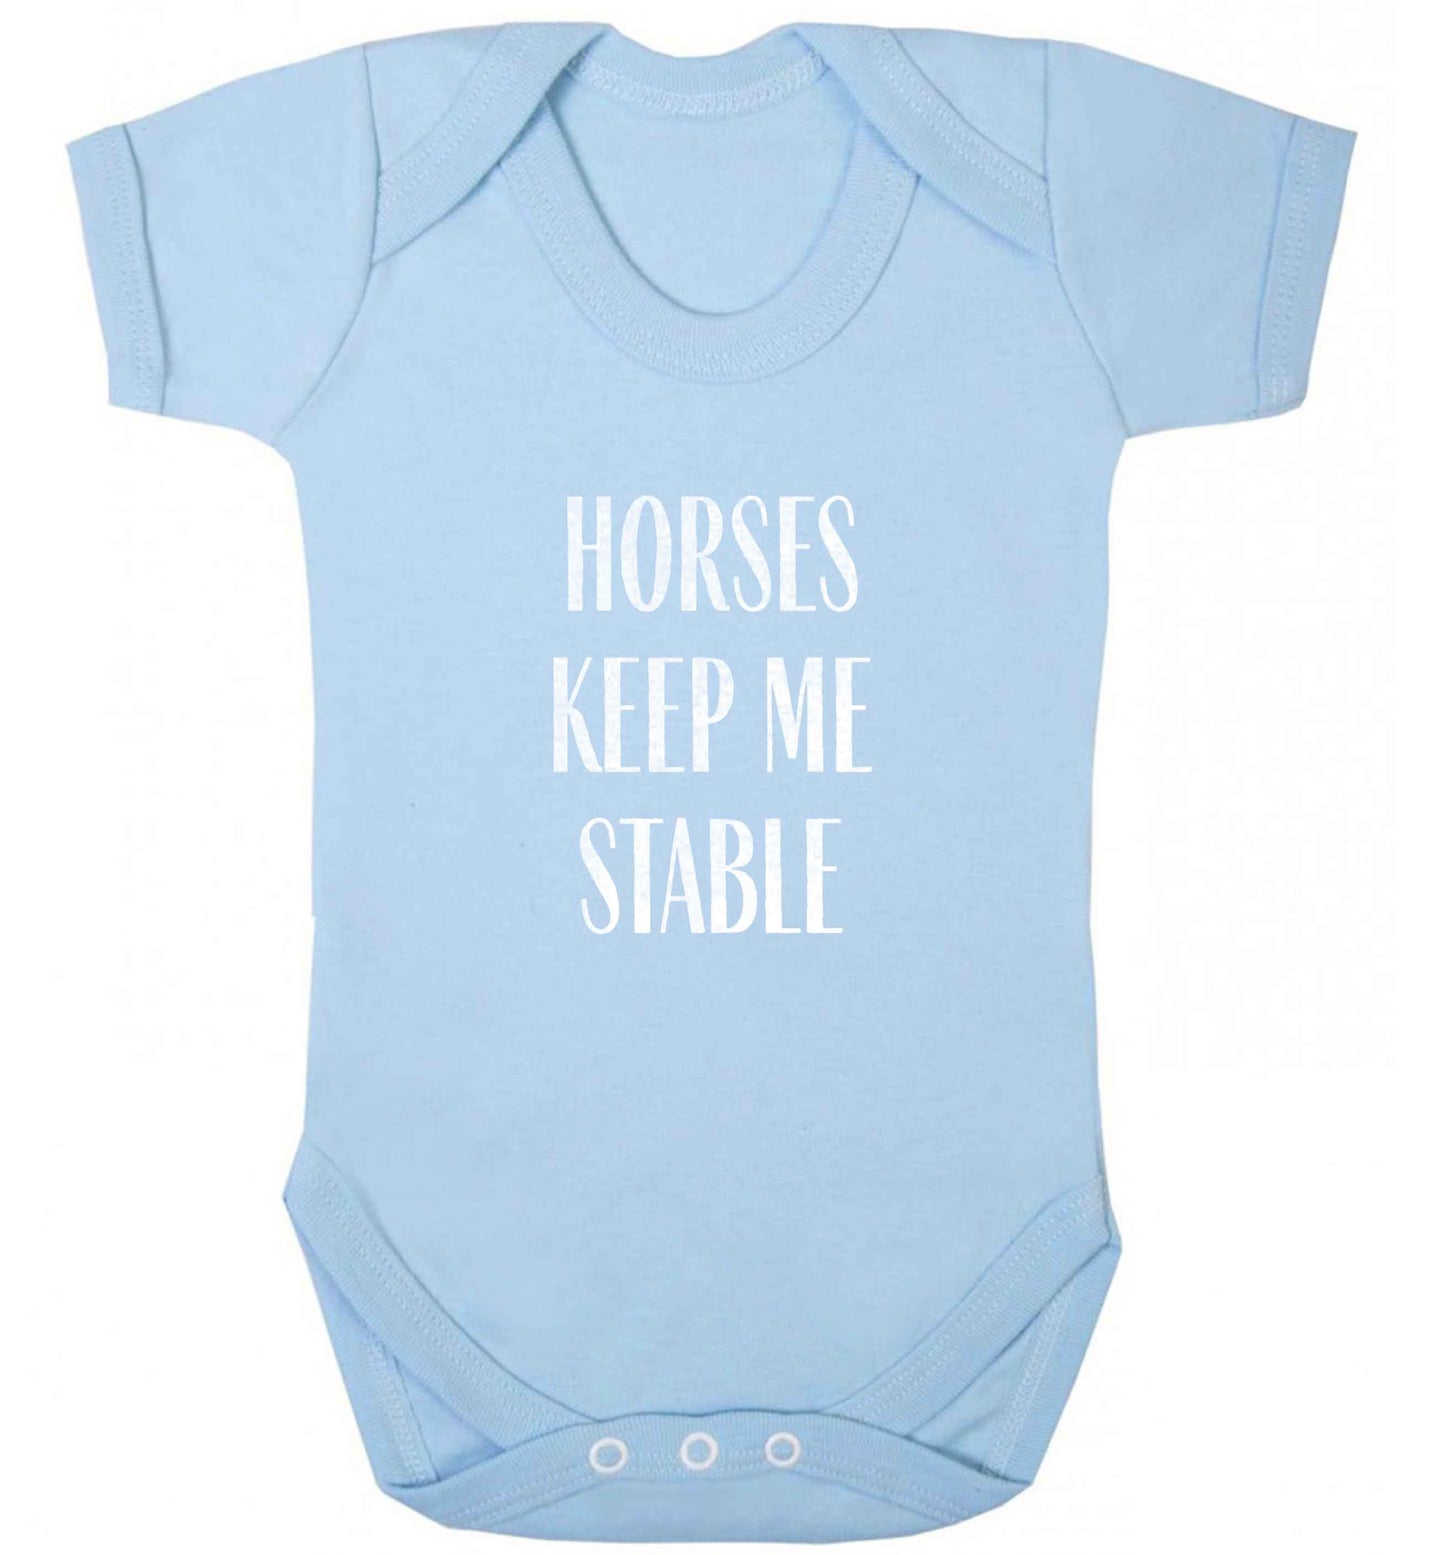 Horses keep me stable baby vest pale blue 18-24 months